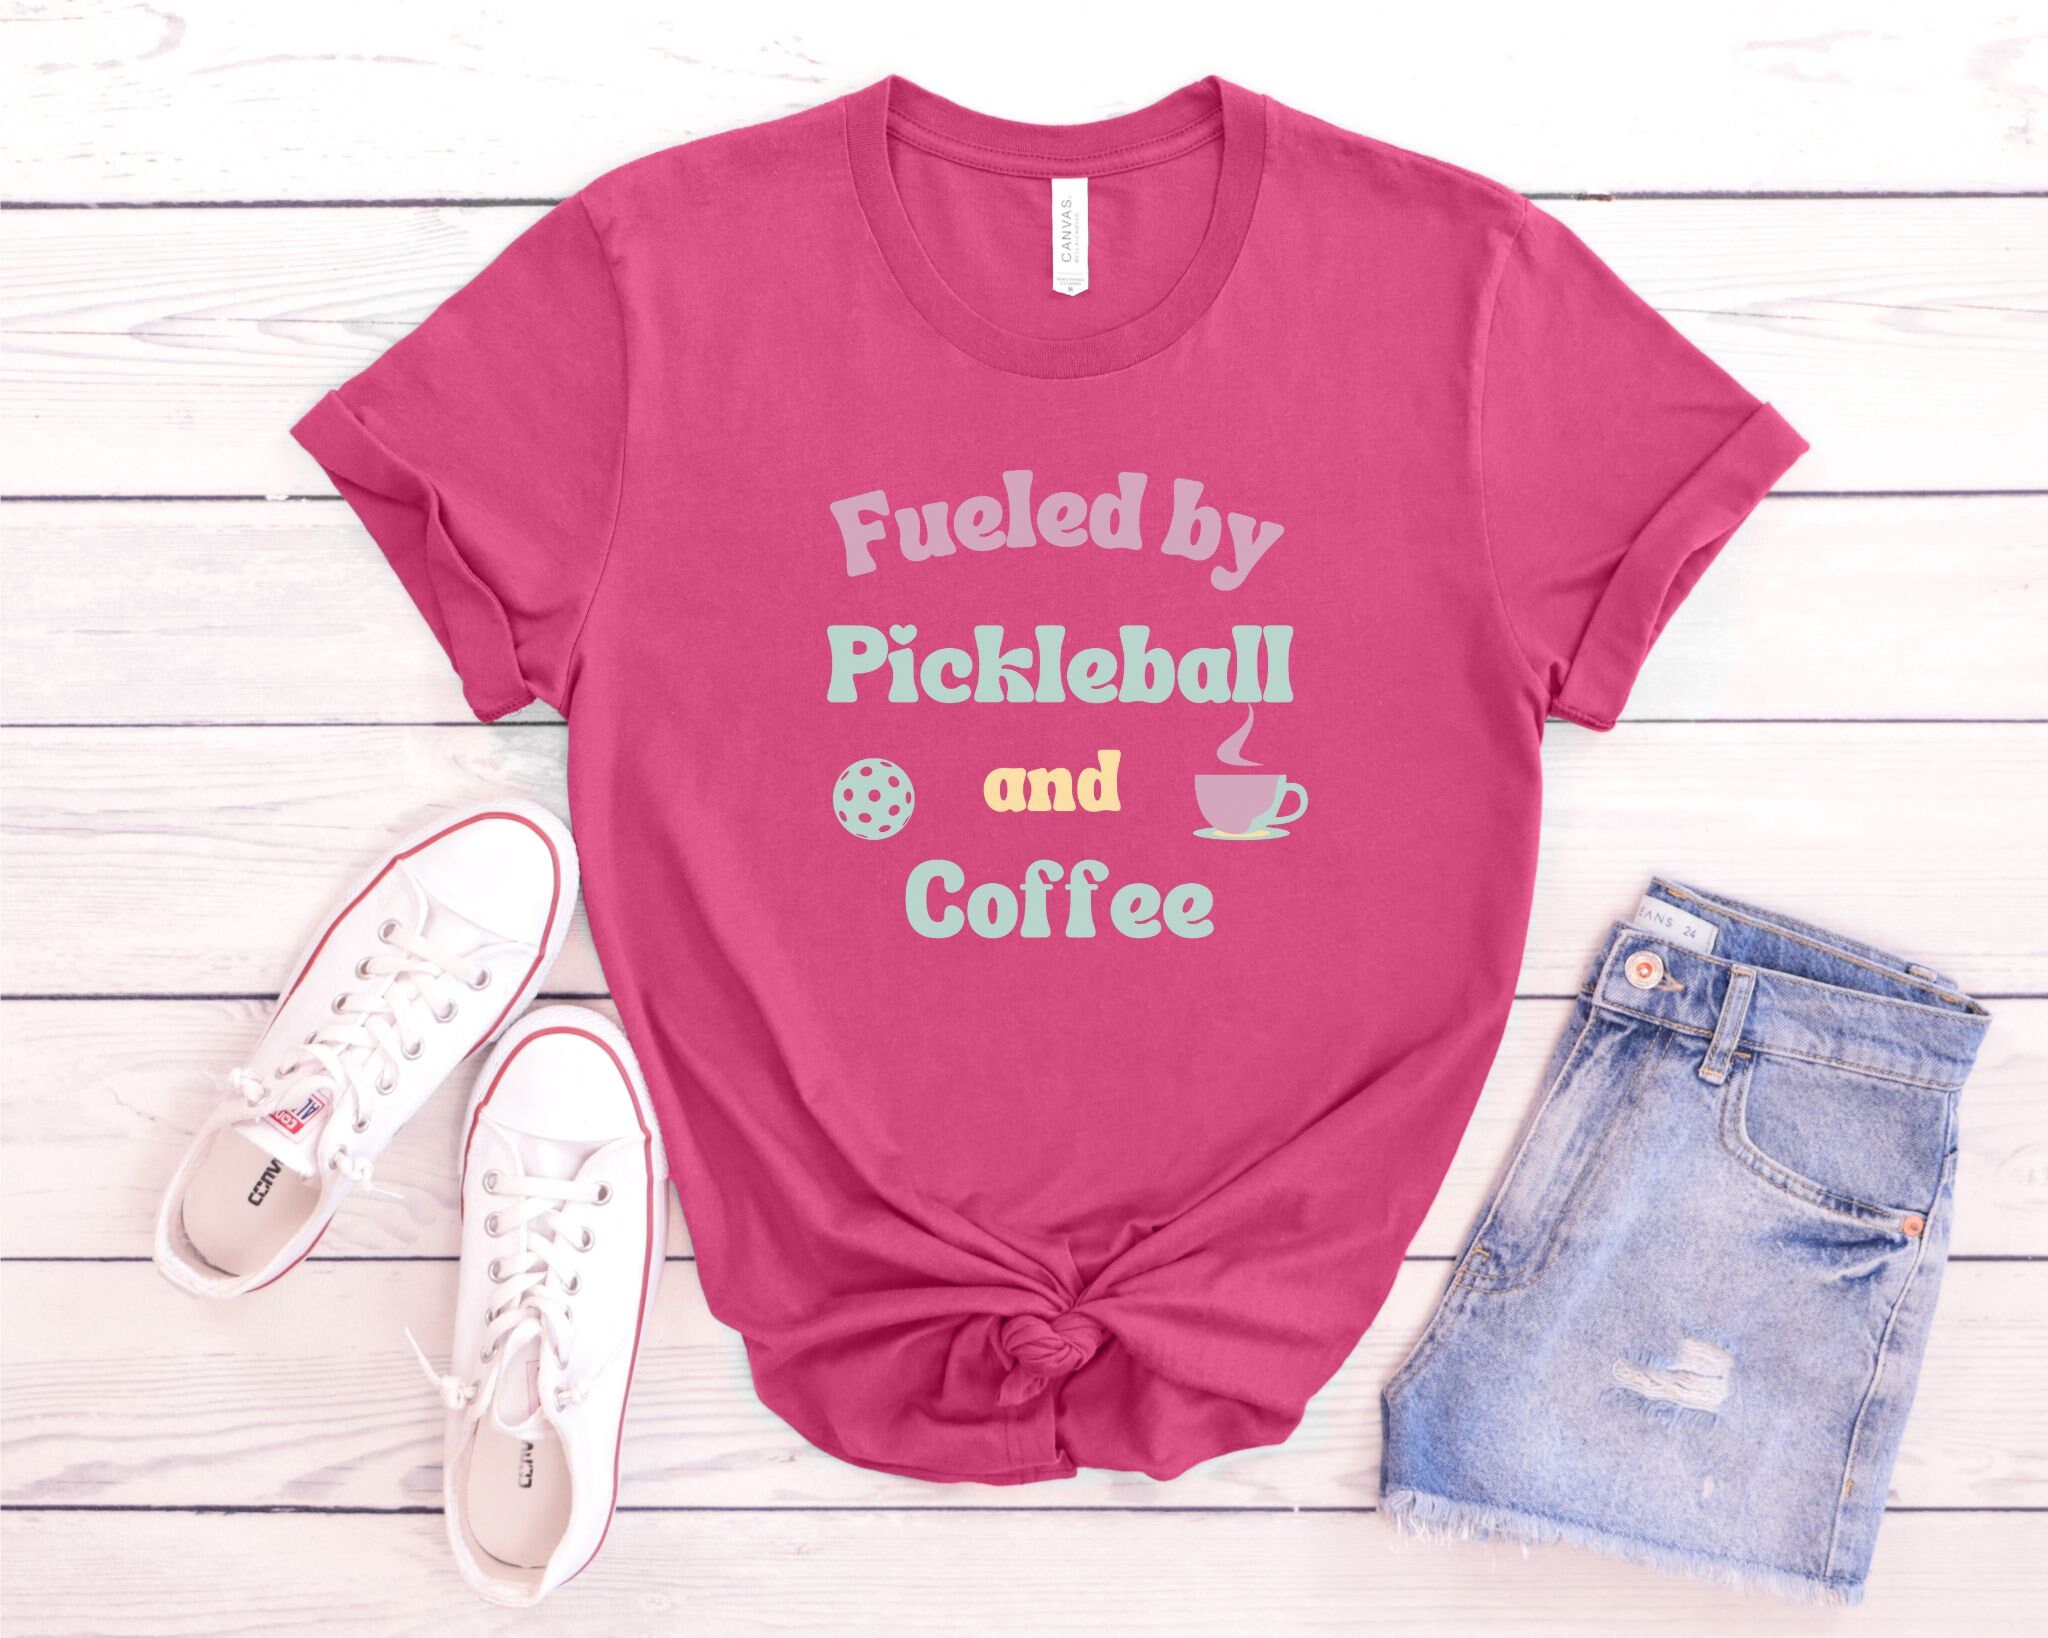 Pickleball Shirt With Pastel Graphic, Pickleball and Coffee Shirt ...